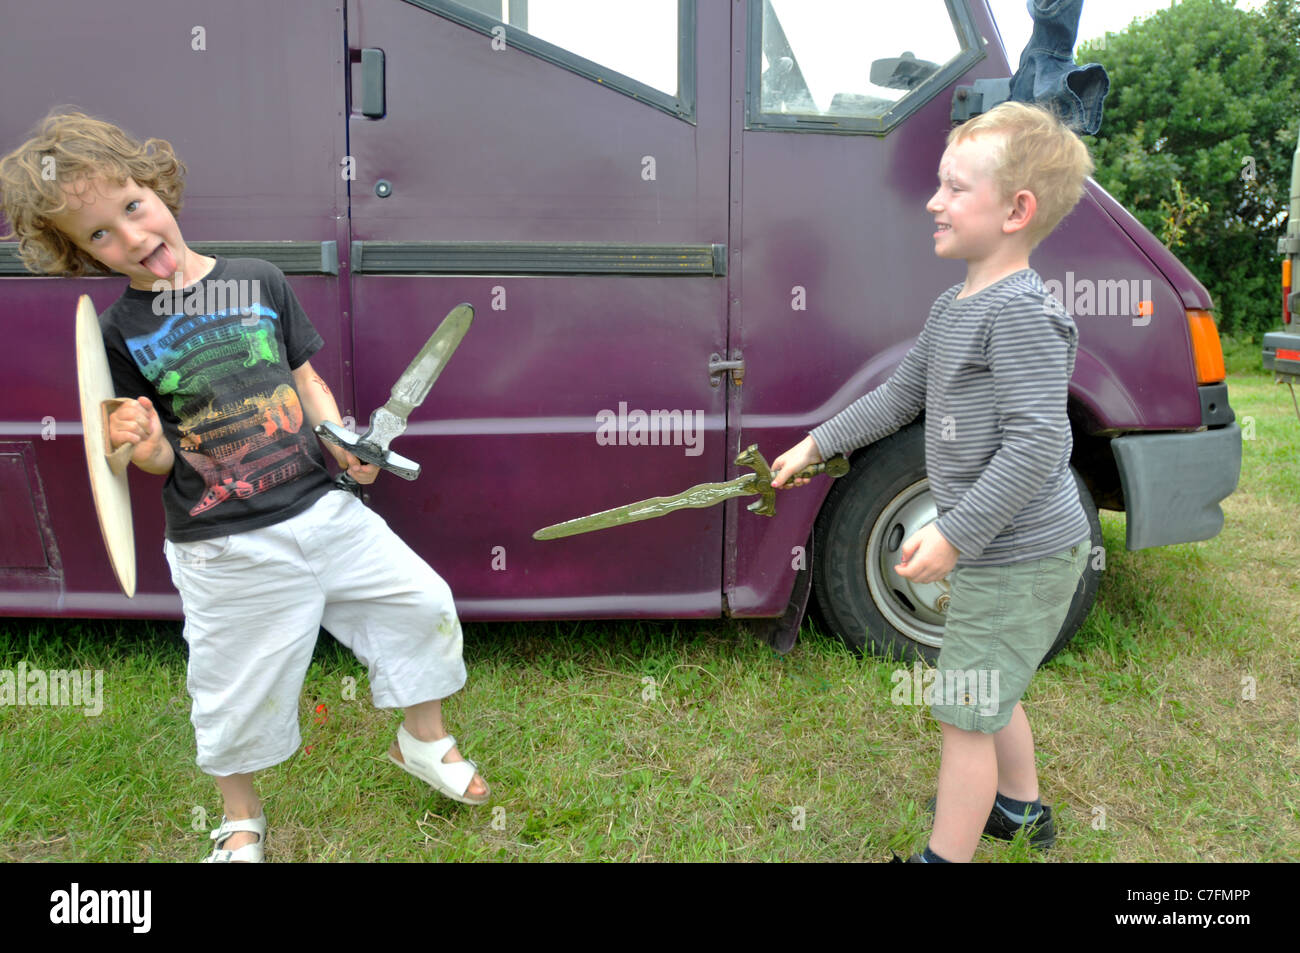 Two boys playing with wooden swords Stock Photo